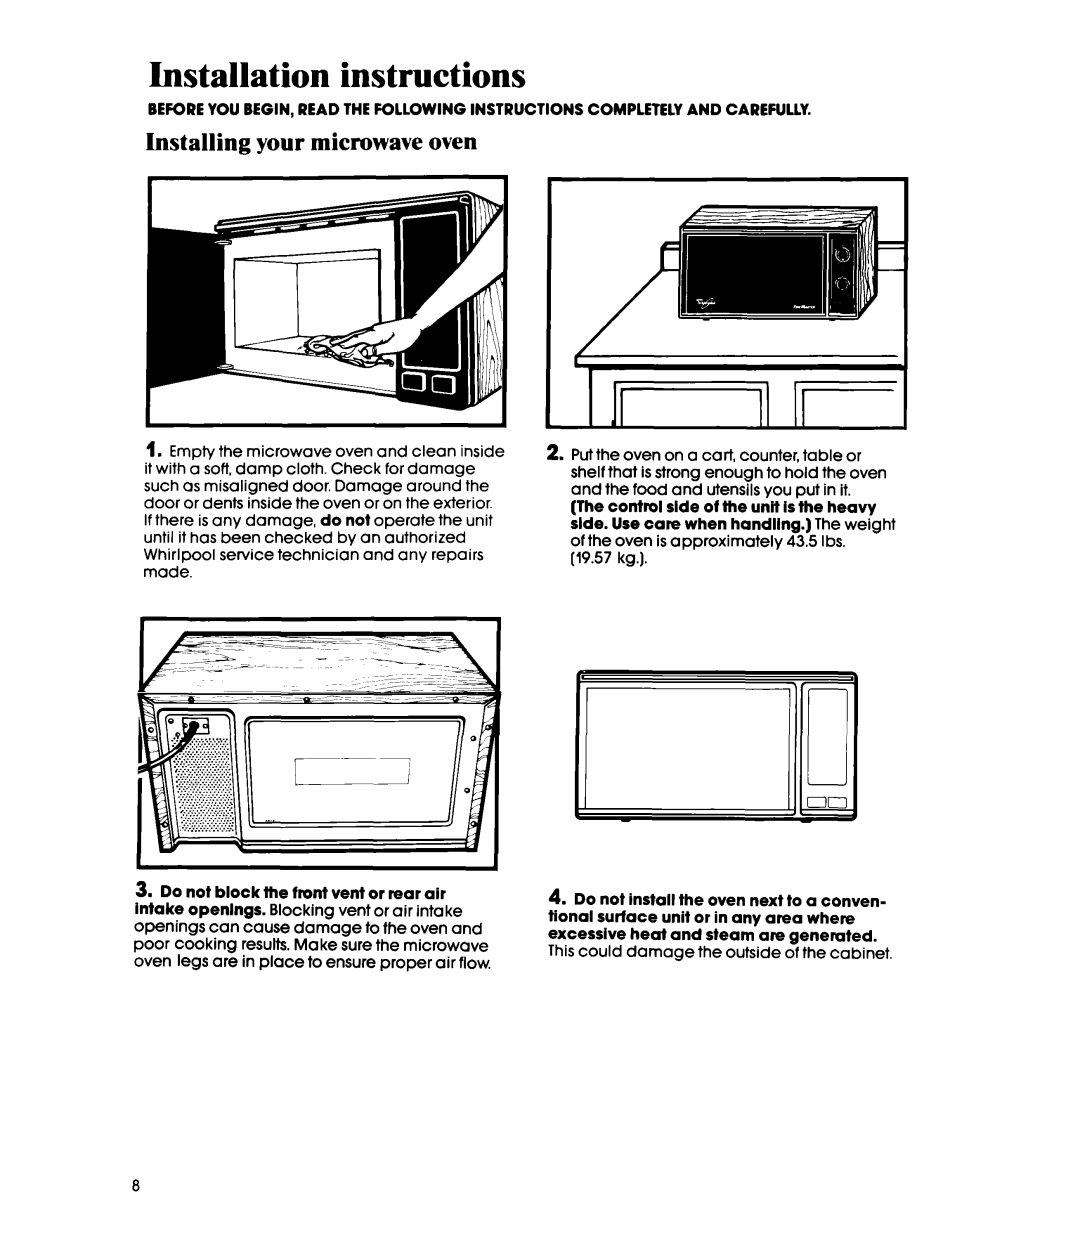 Whirlpool MW32OOXS manual Installation instructions, Installing your microwave oven 